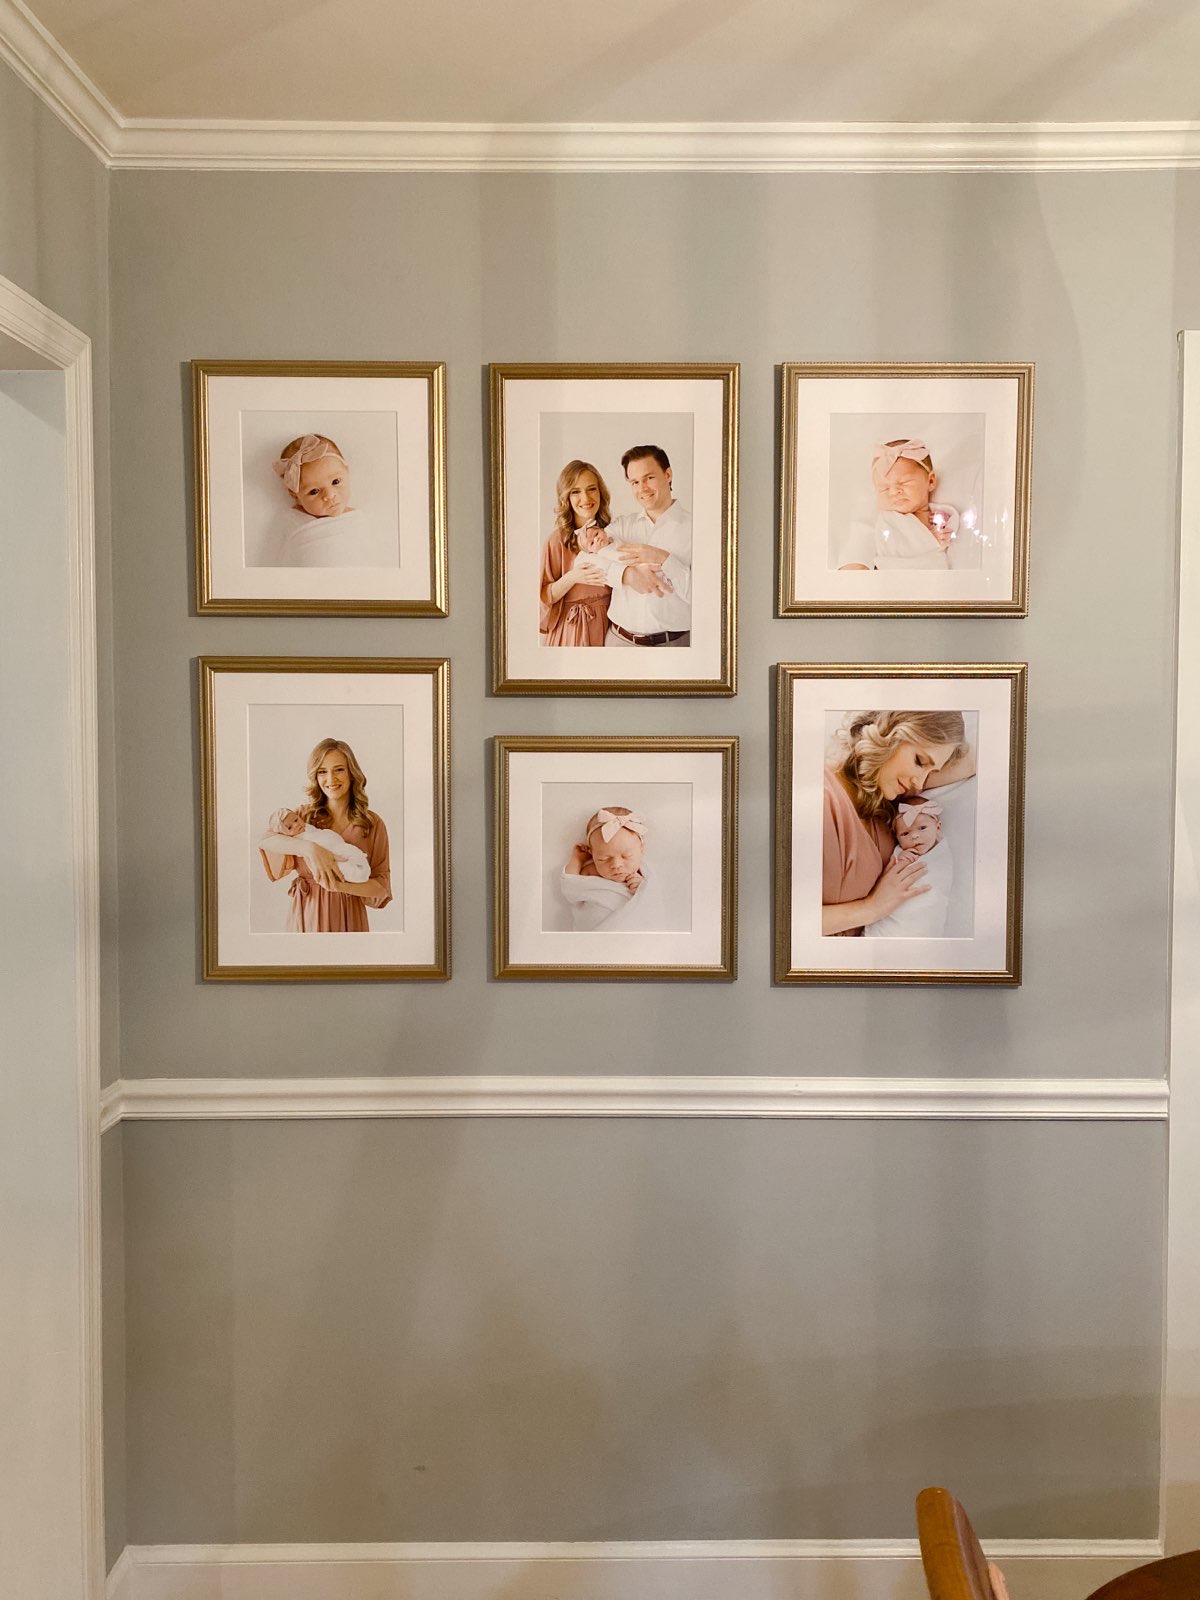 Gallery wall hanging in clients home designed by Atlanta Newborn Photographer, Lindsey Powell Photography